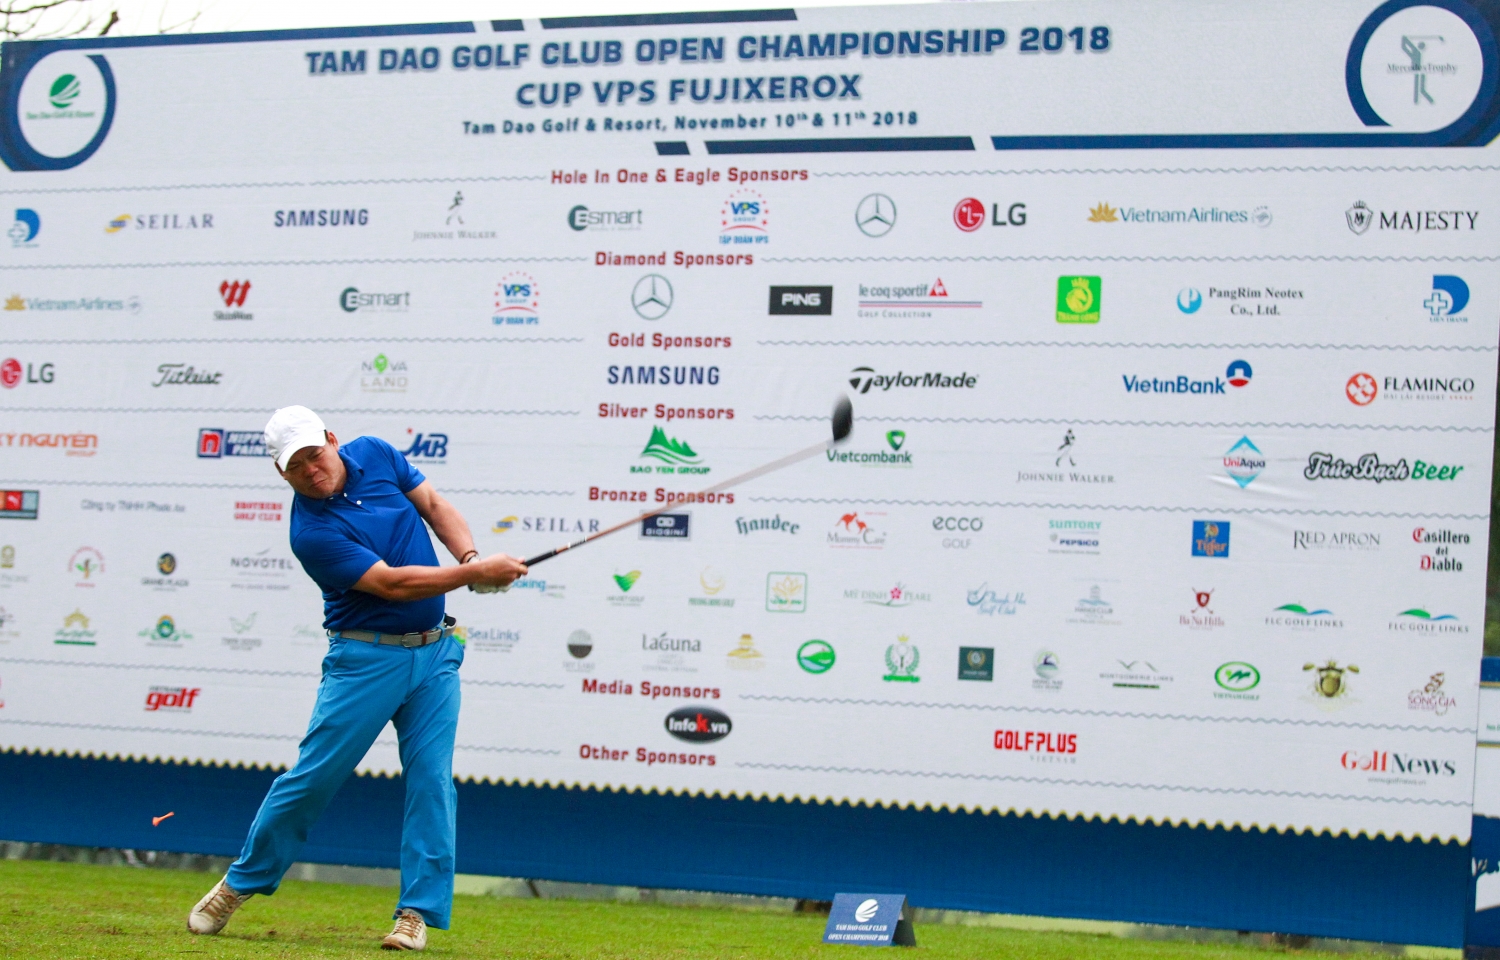 BSmart continues to accompany major golf tournaments in the North.